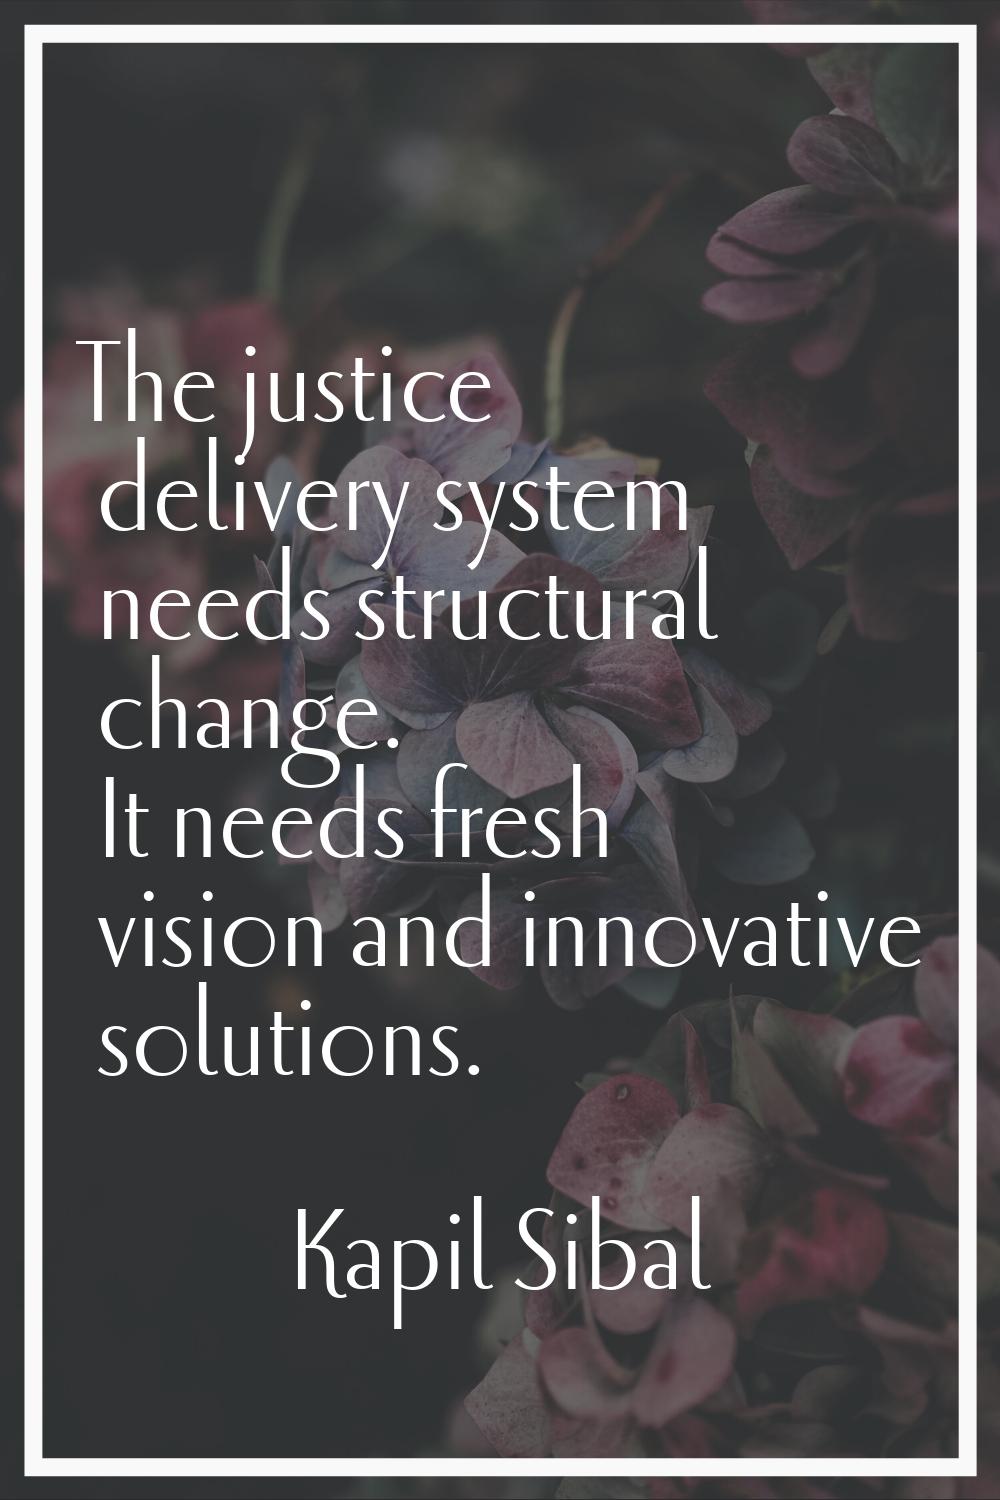 The justice delivery system needs structural change. It needs fresh vision and innovative solutions